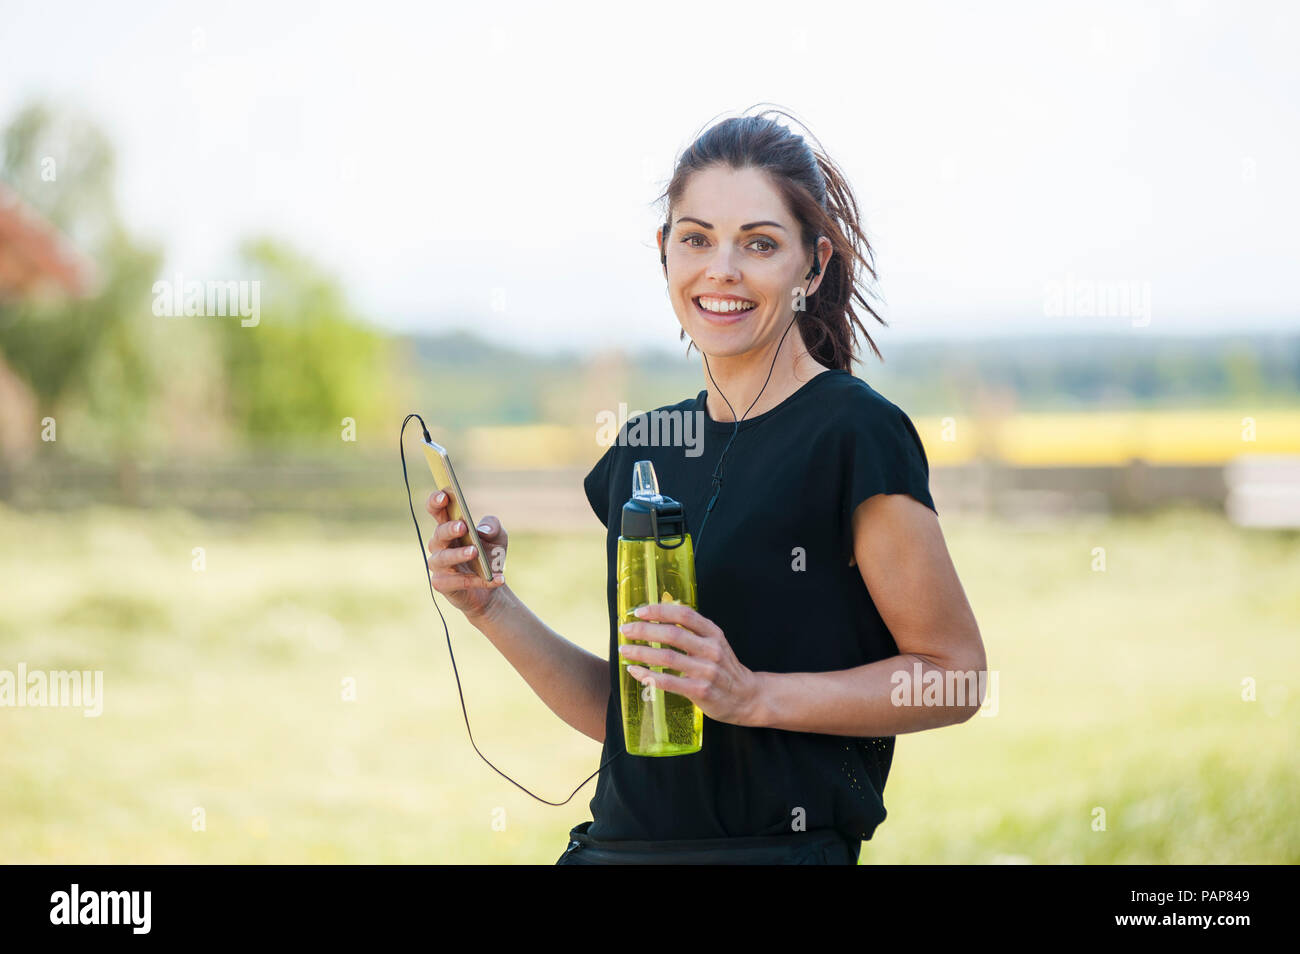 Sportive woman using smartphone during cooling break Stock Photo